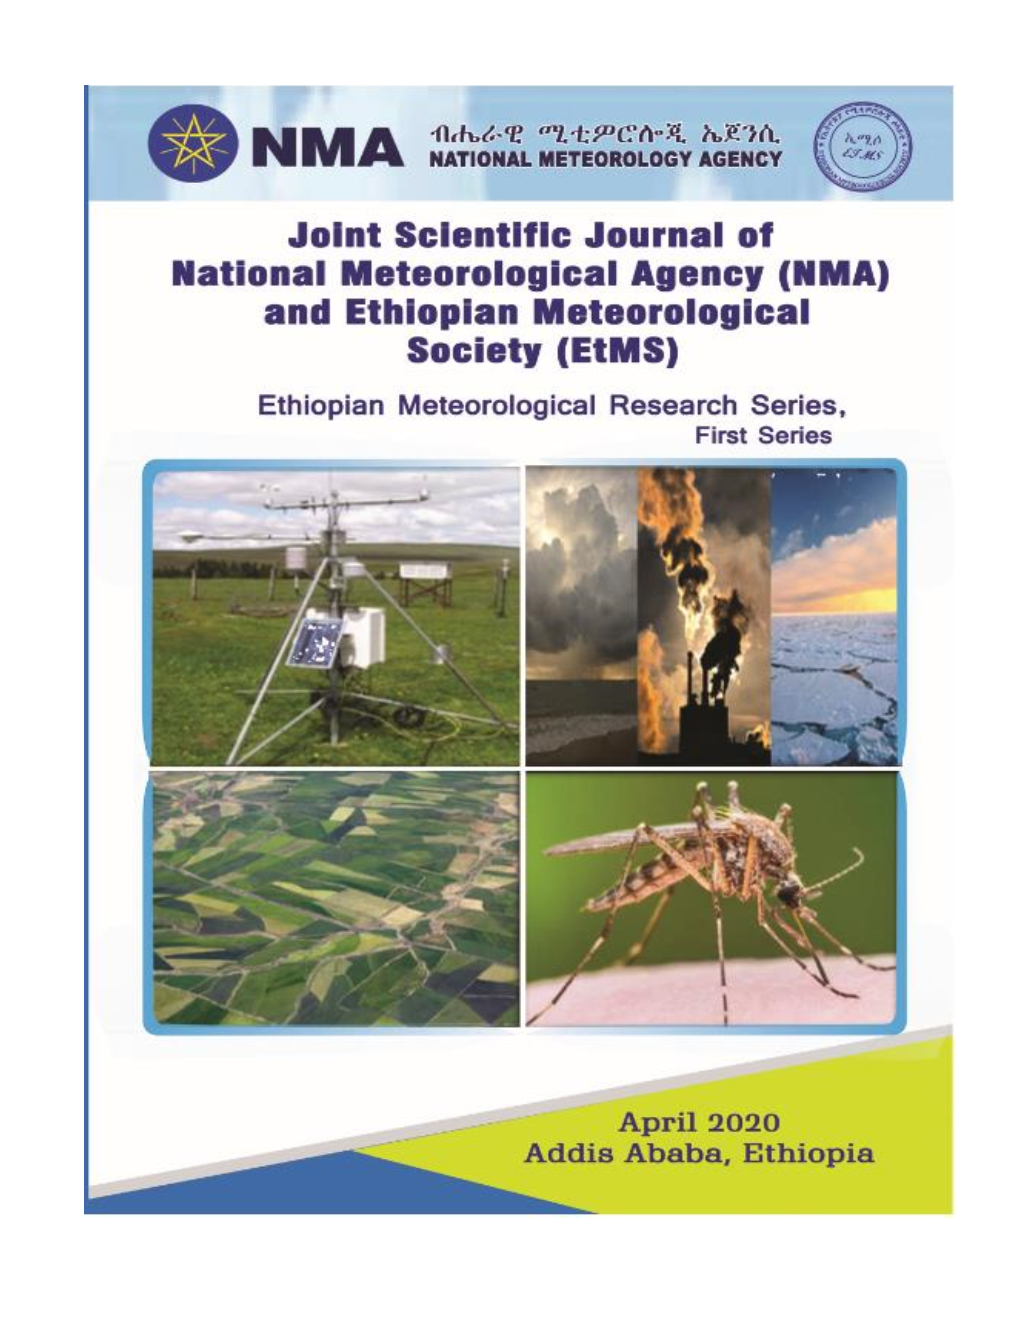 Joint Scientifc Journal of National Meteorological Agency and Ethiopian Meteorological Society